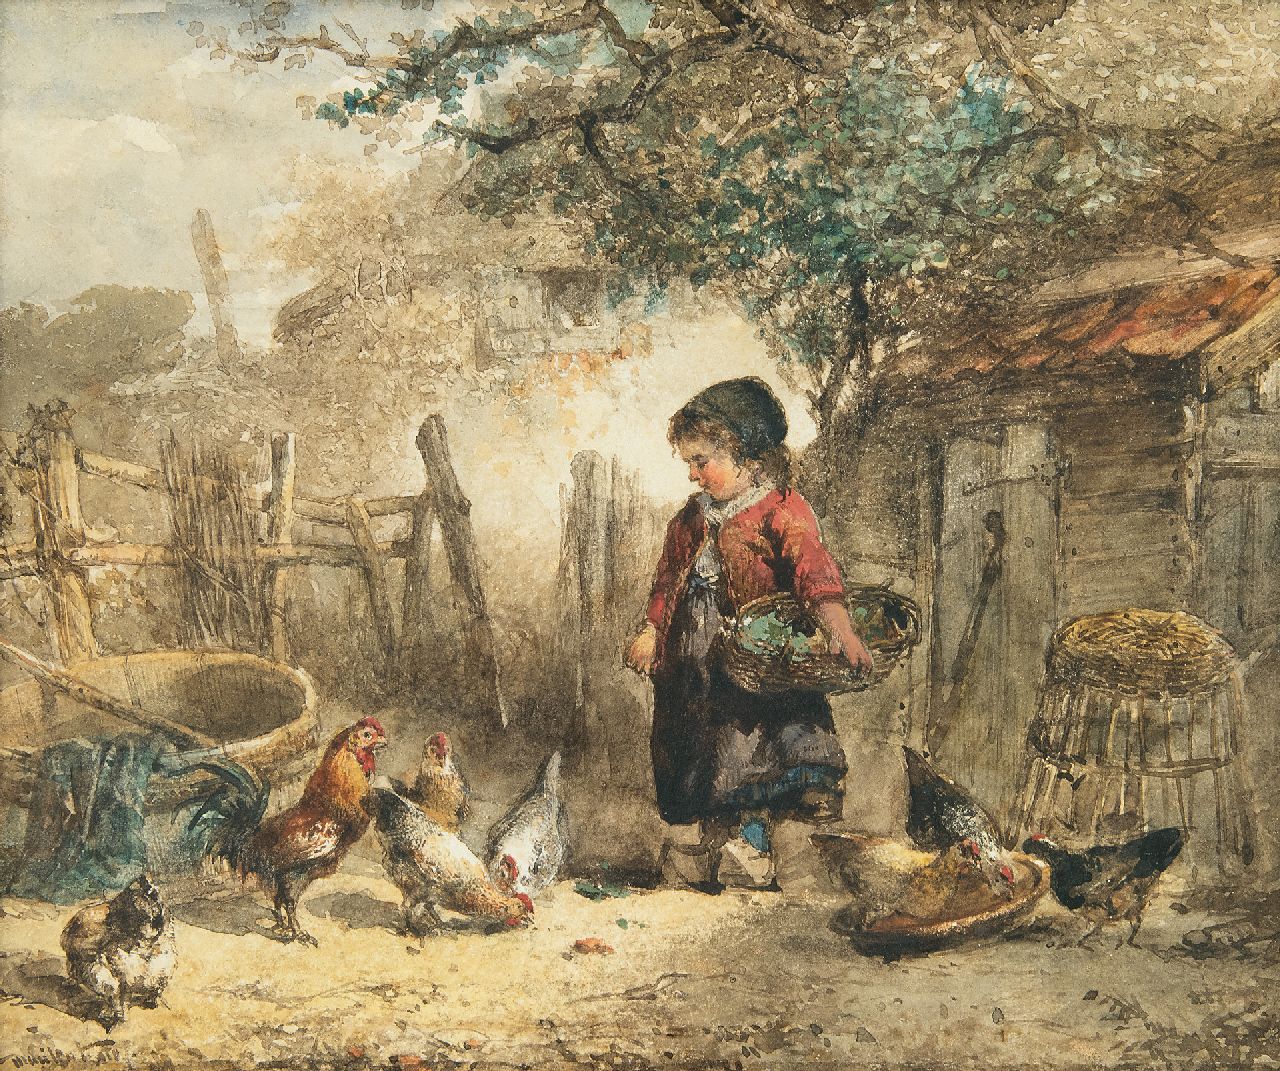 Kate J.M.H. ten | Johan 'Mari' Henri ten Kate | Watercolours and drawings offered for sale | Feeding the chickens, watercolour on paper 21.1 x 25.4 cm, signed l.l.